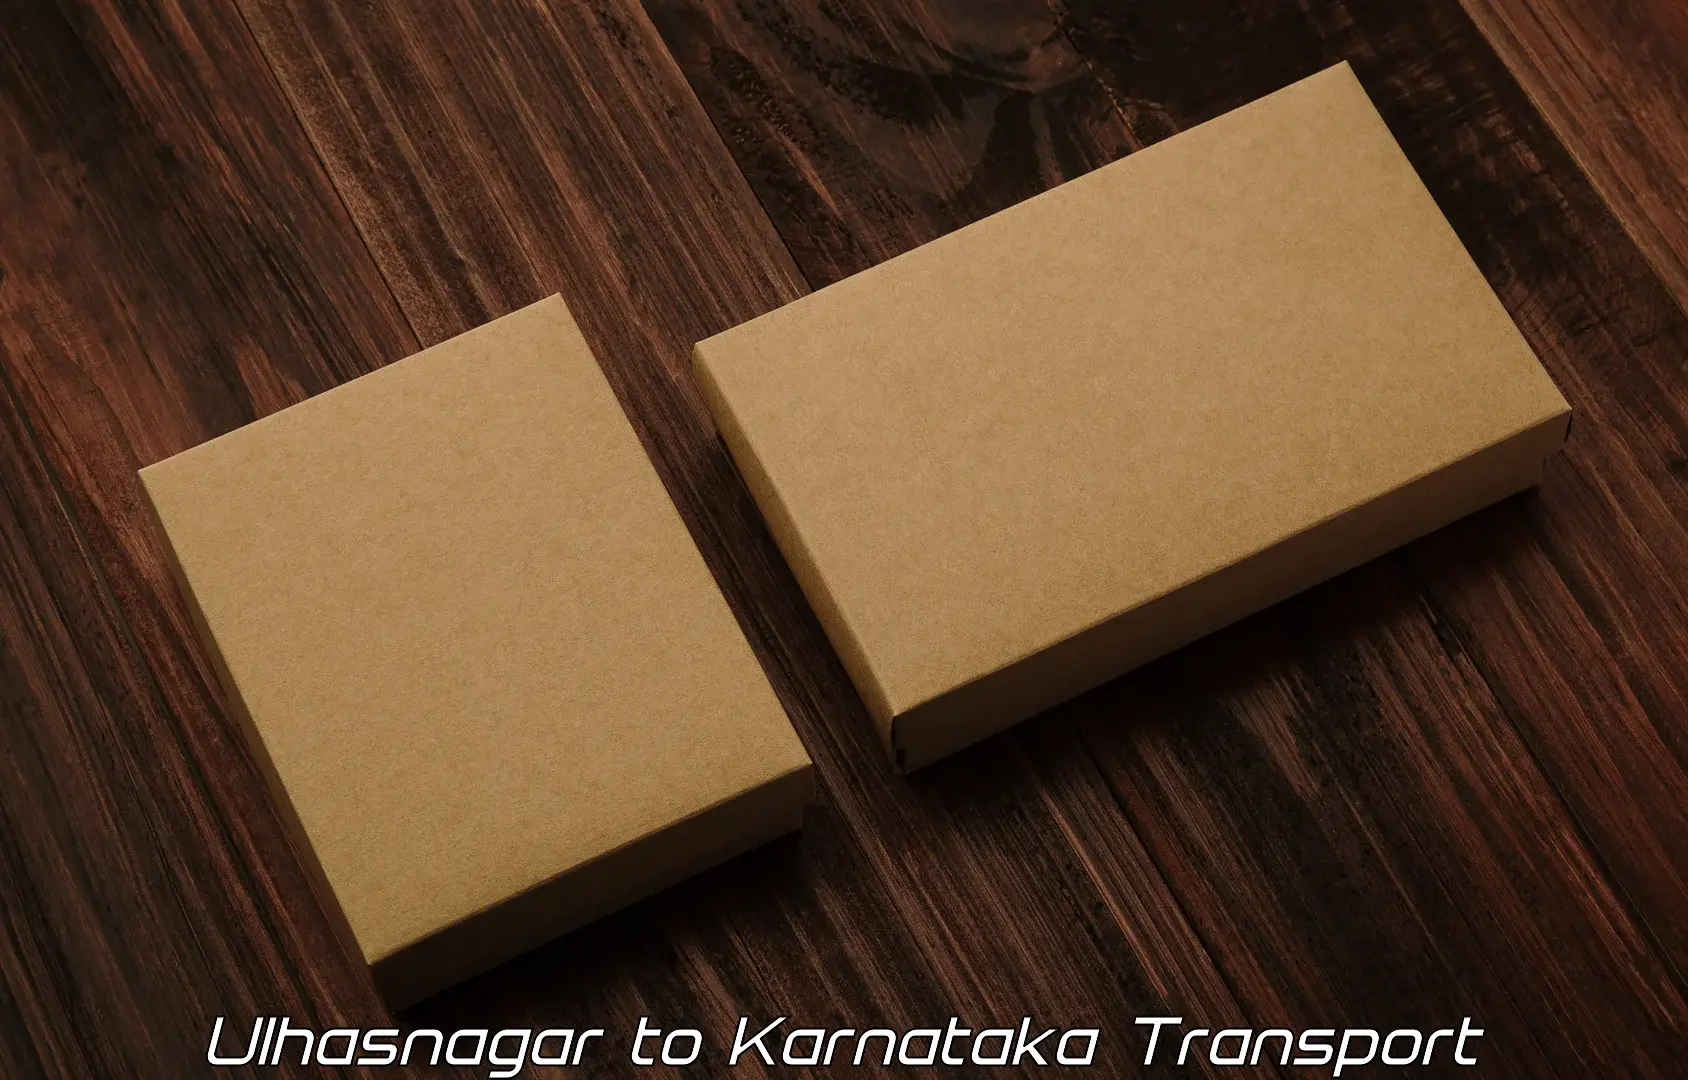 Truck transport companies in India Ulhasnagar to Bagalkot